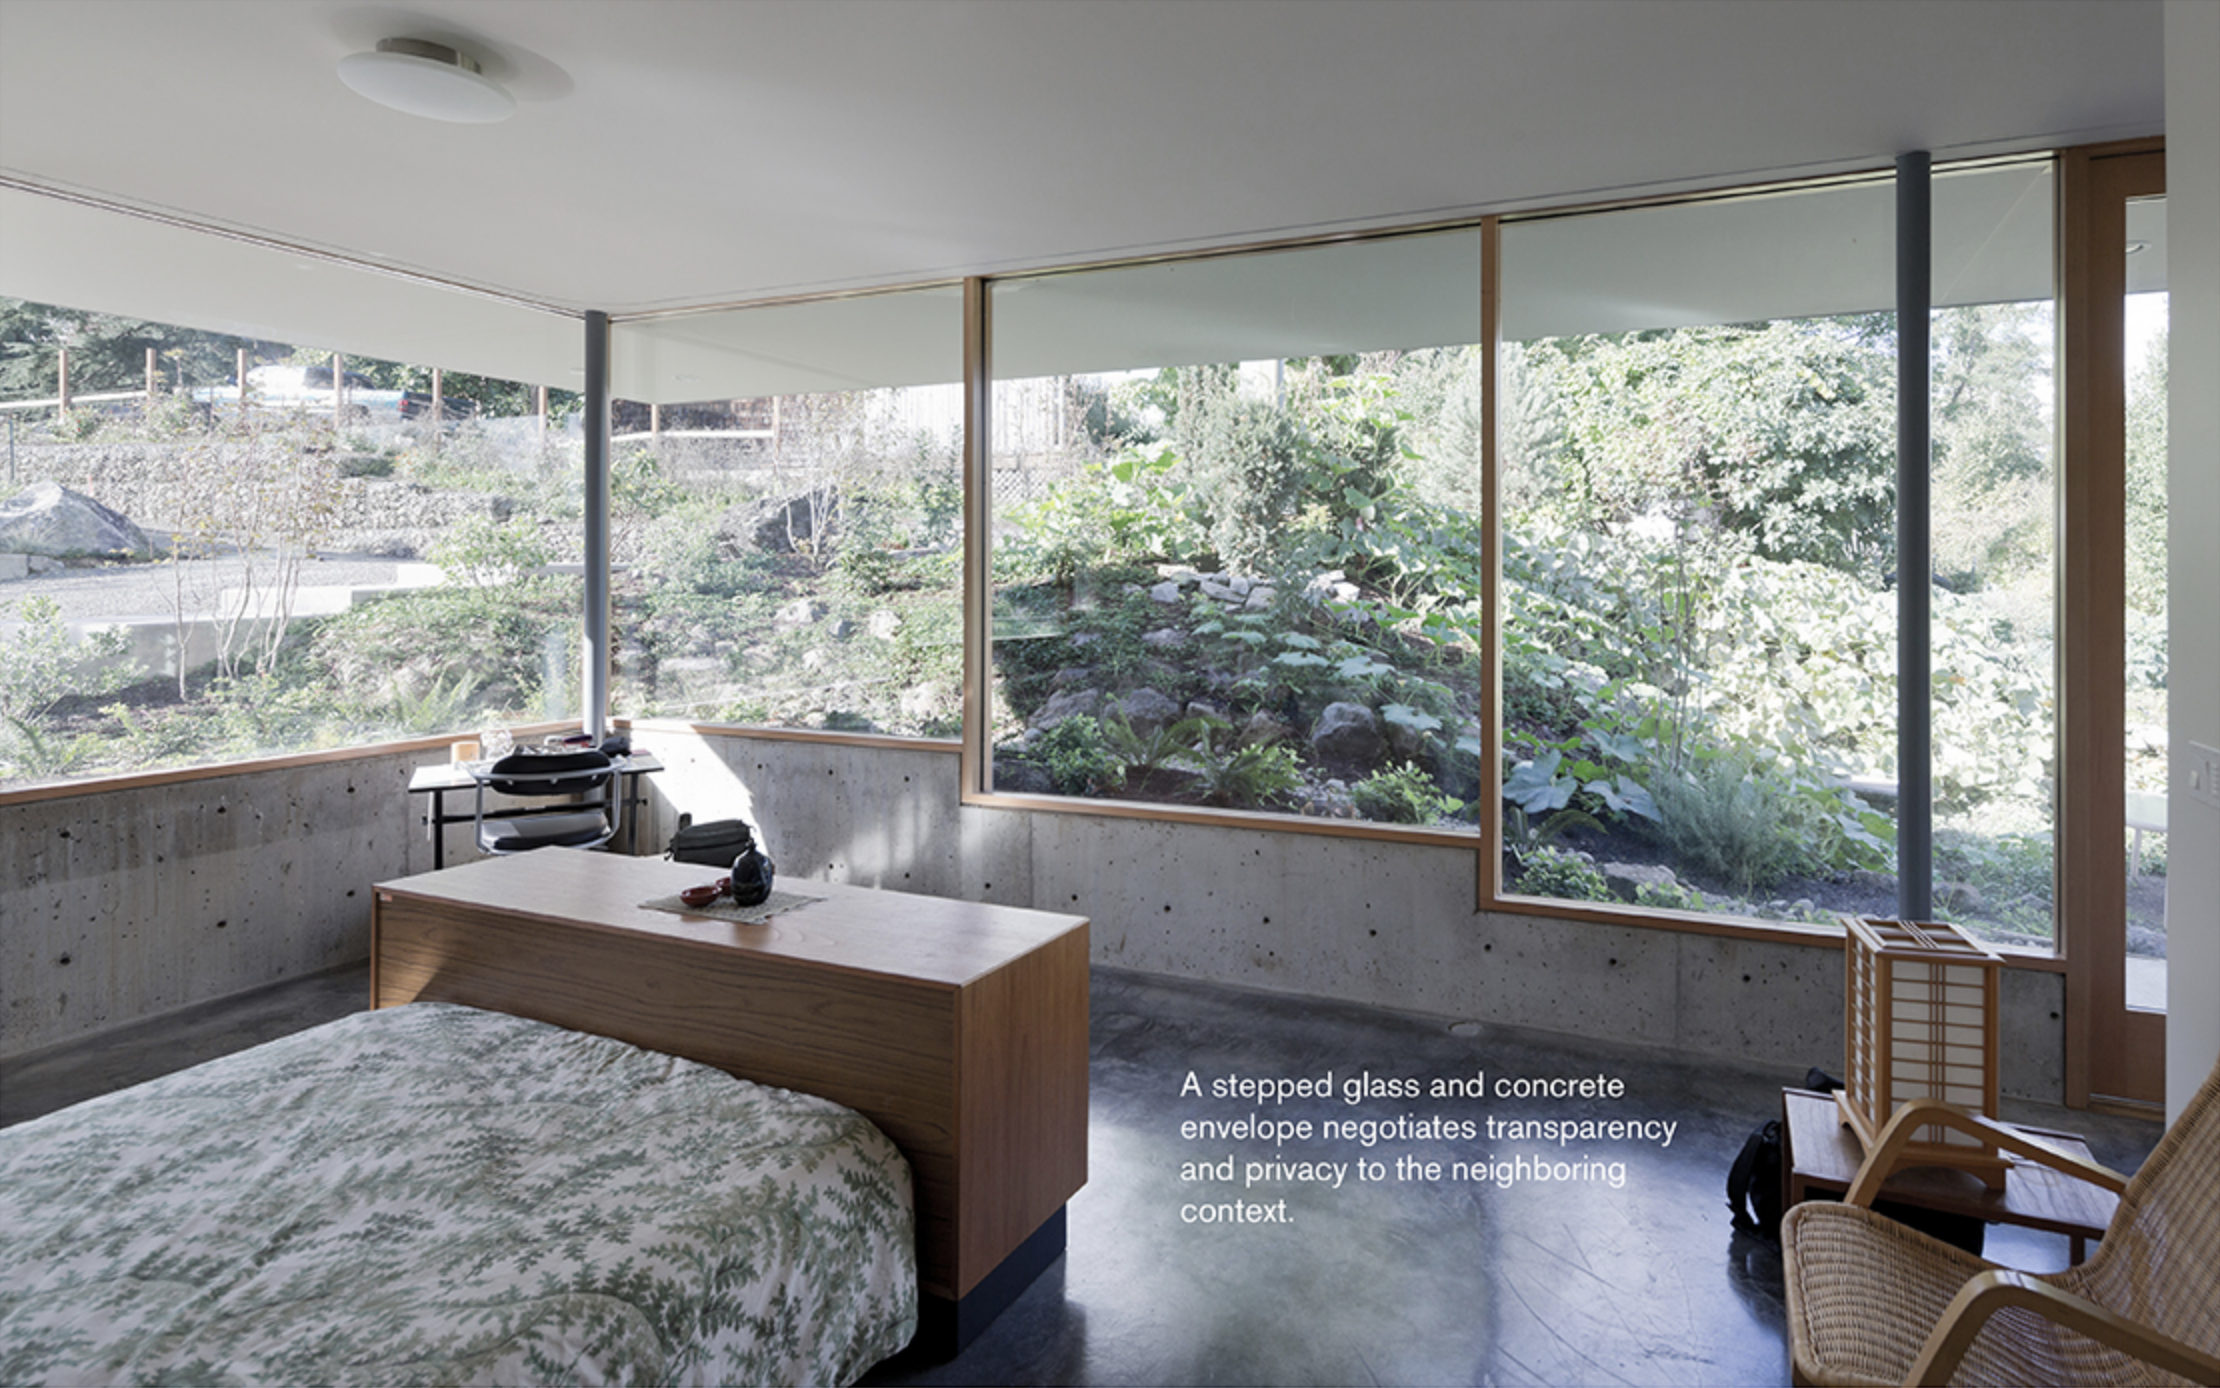 Courtyard House by NO ARCHITECTURE. Photo: NO ARCHITECTURE.